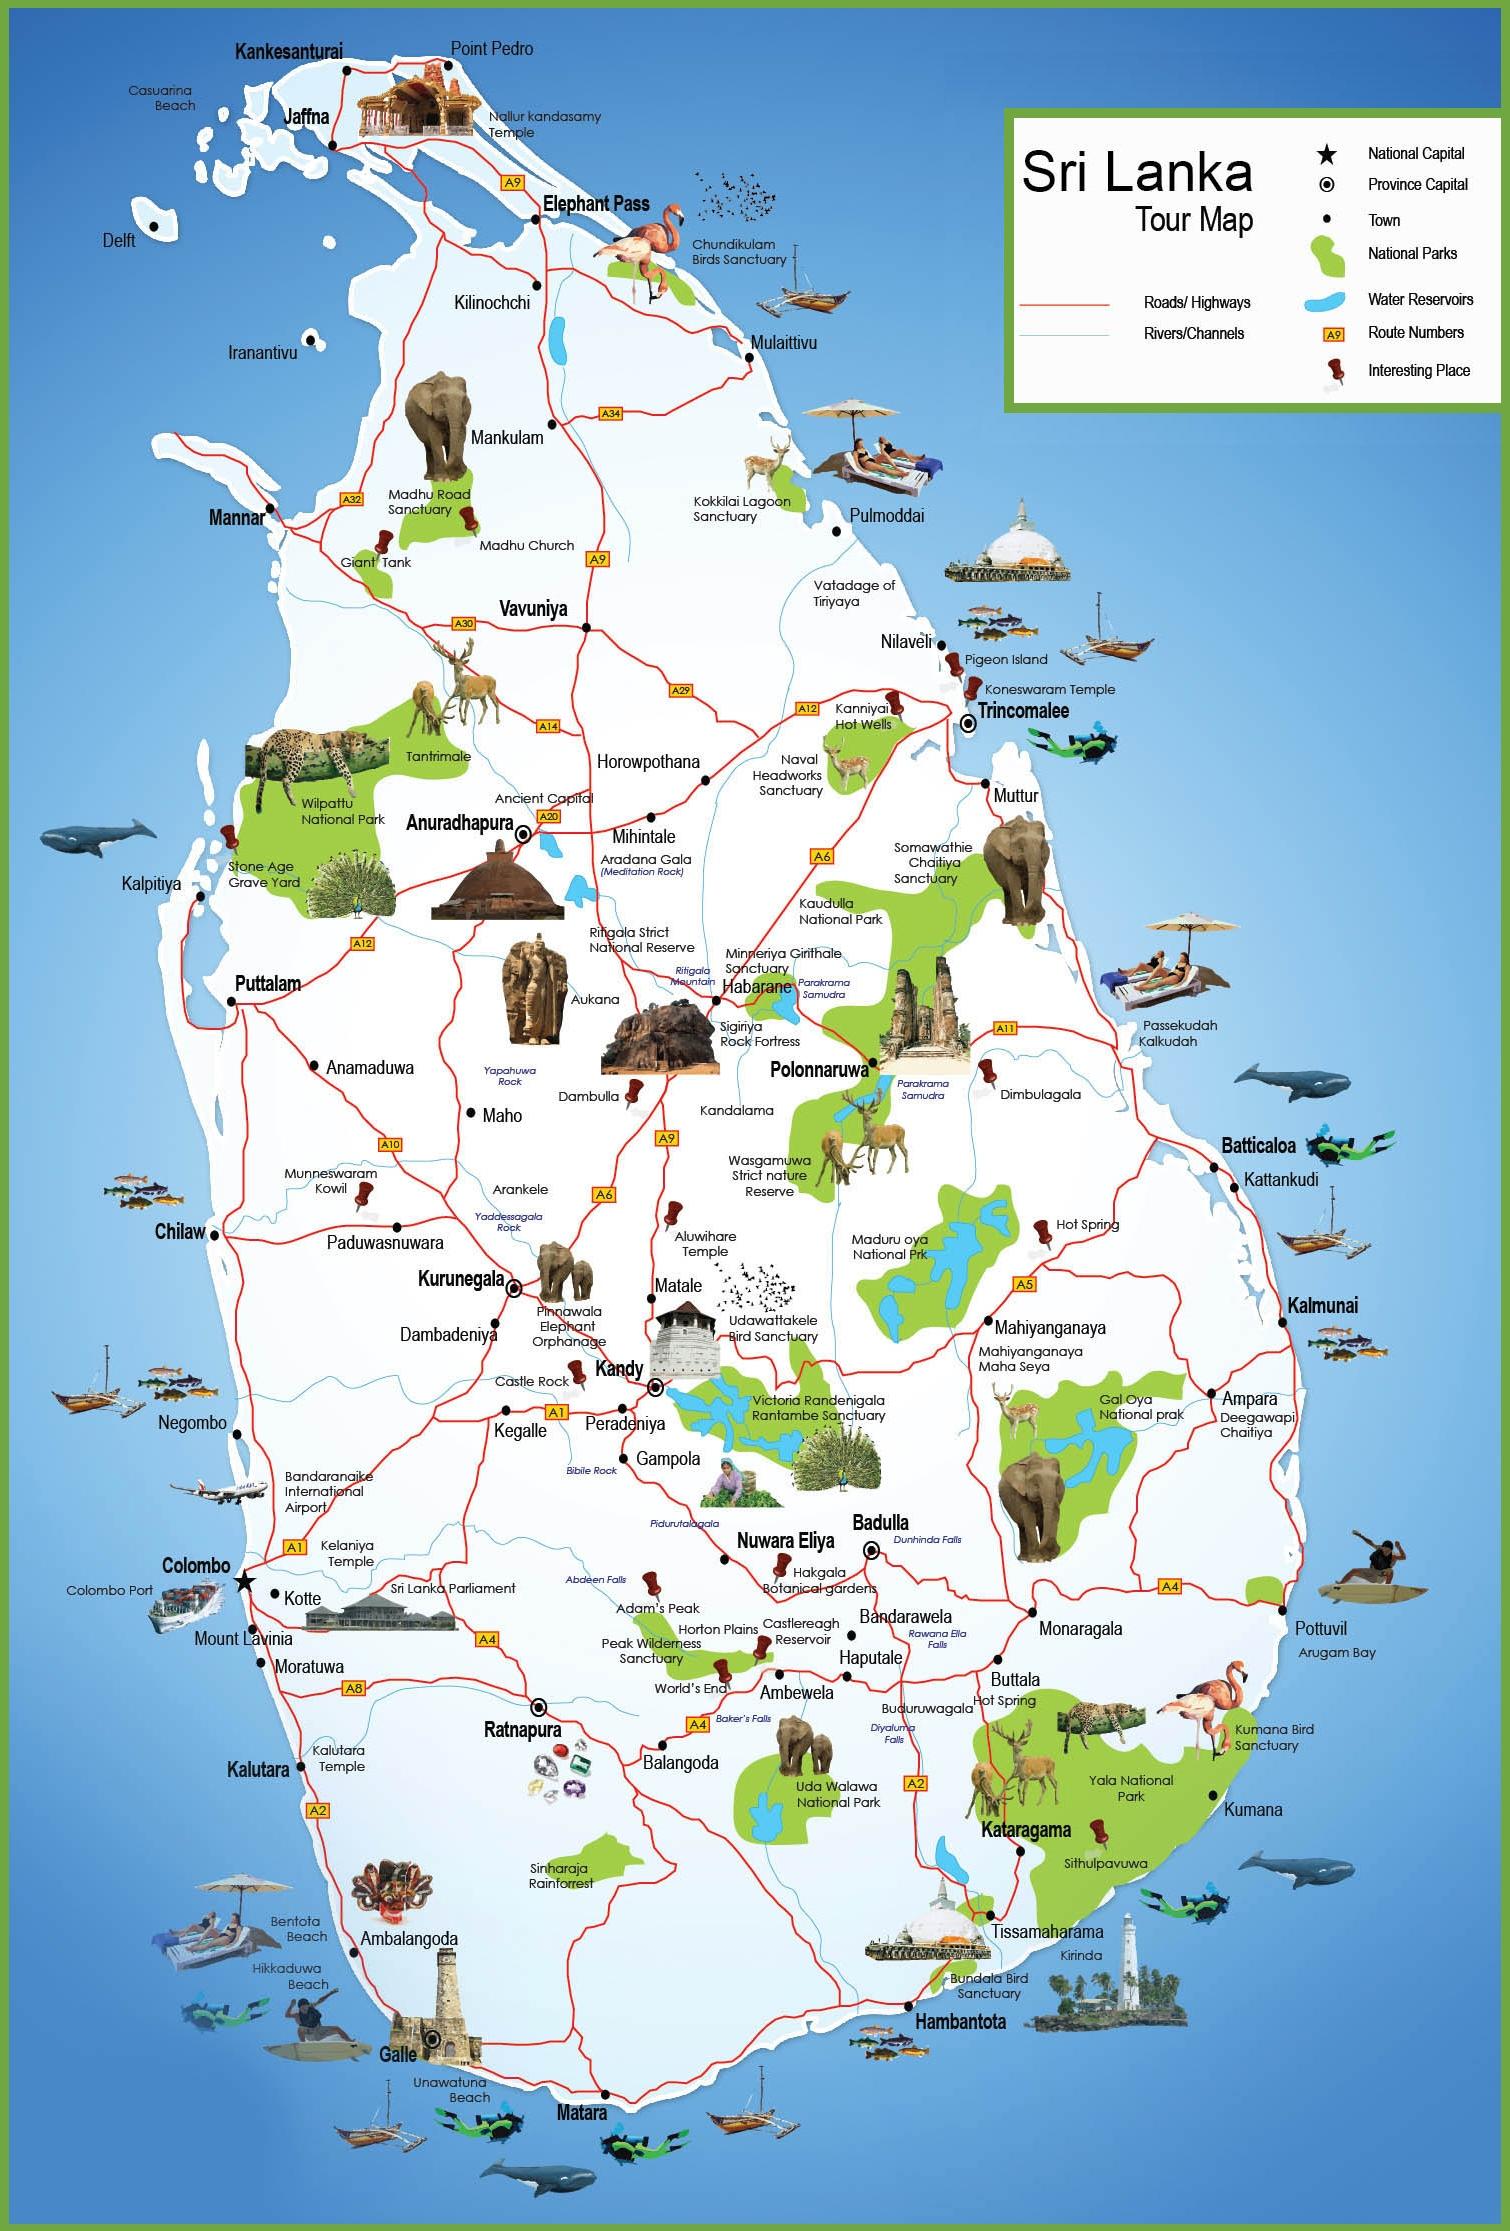 wilpaththu national park map